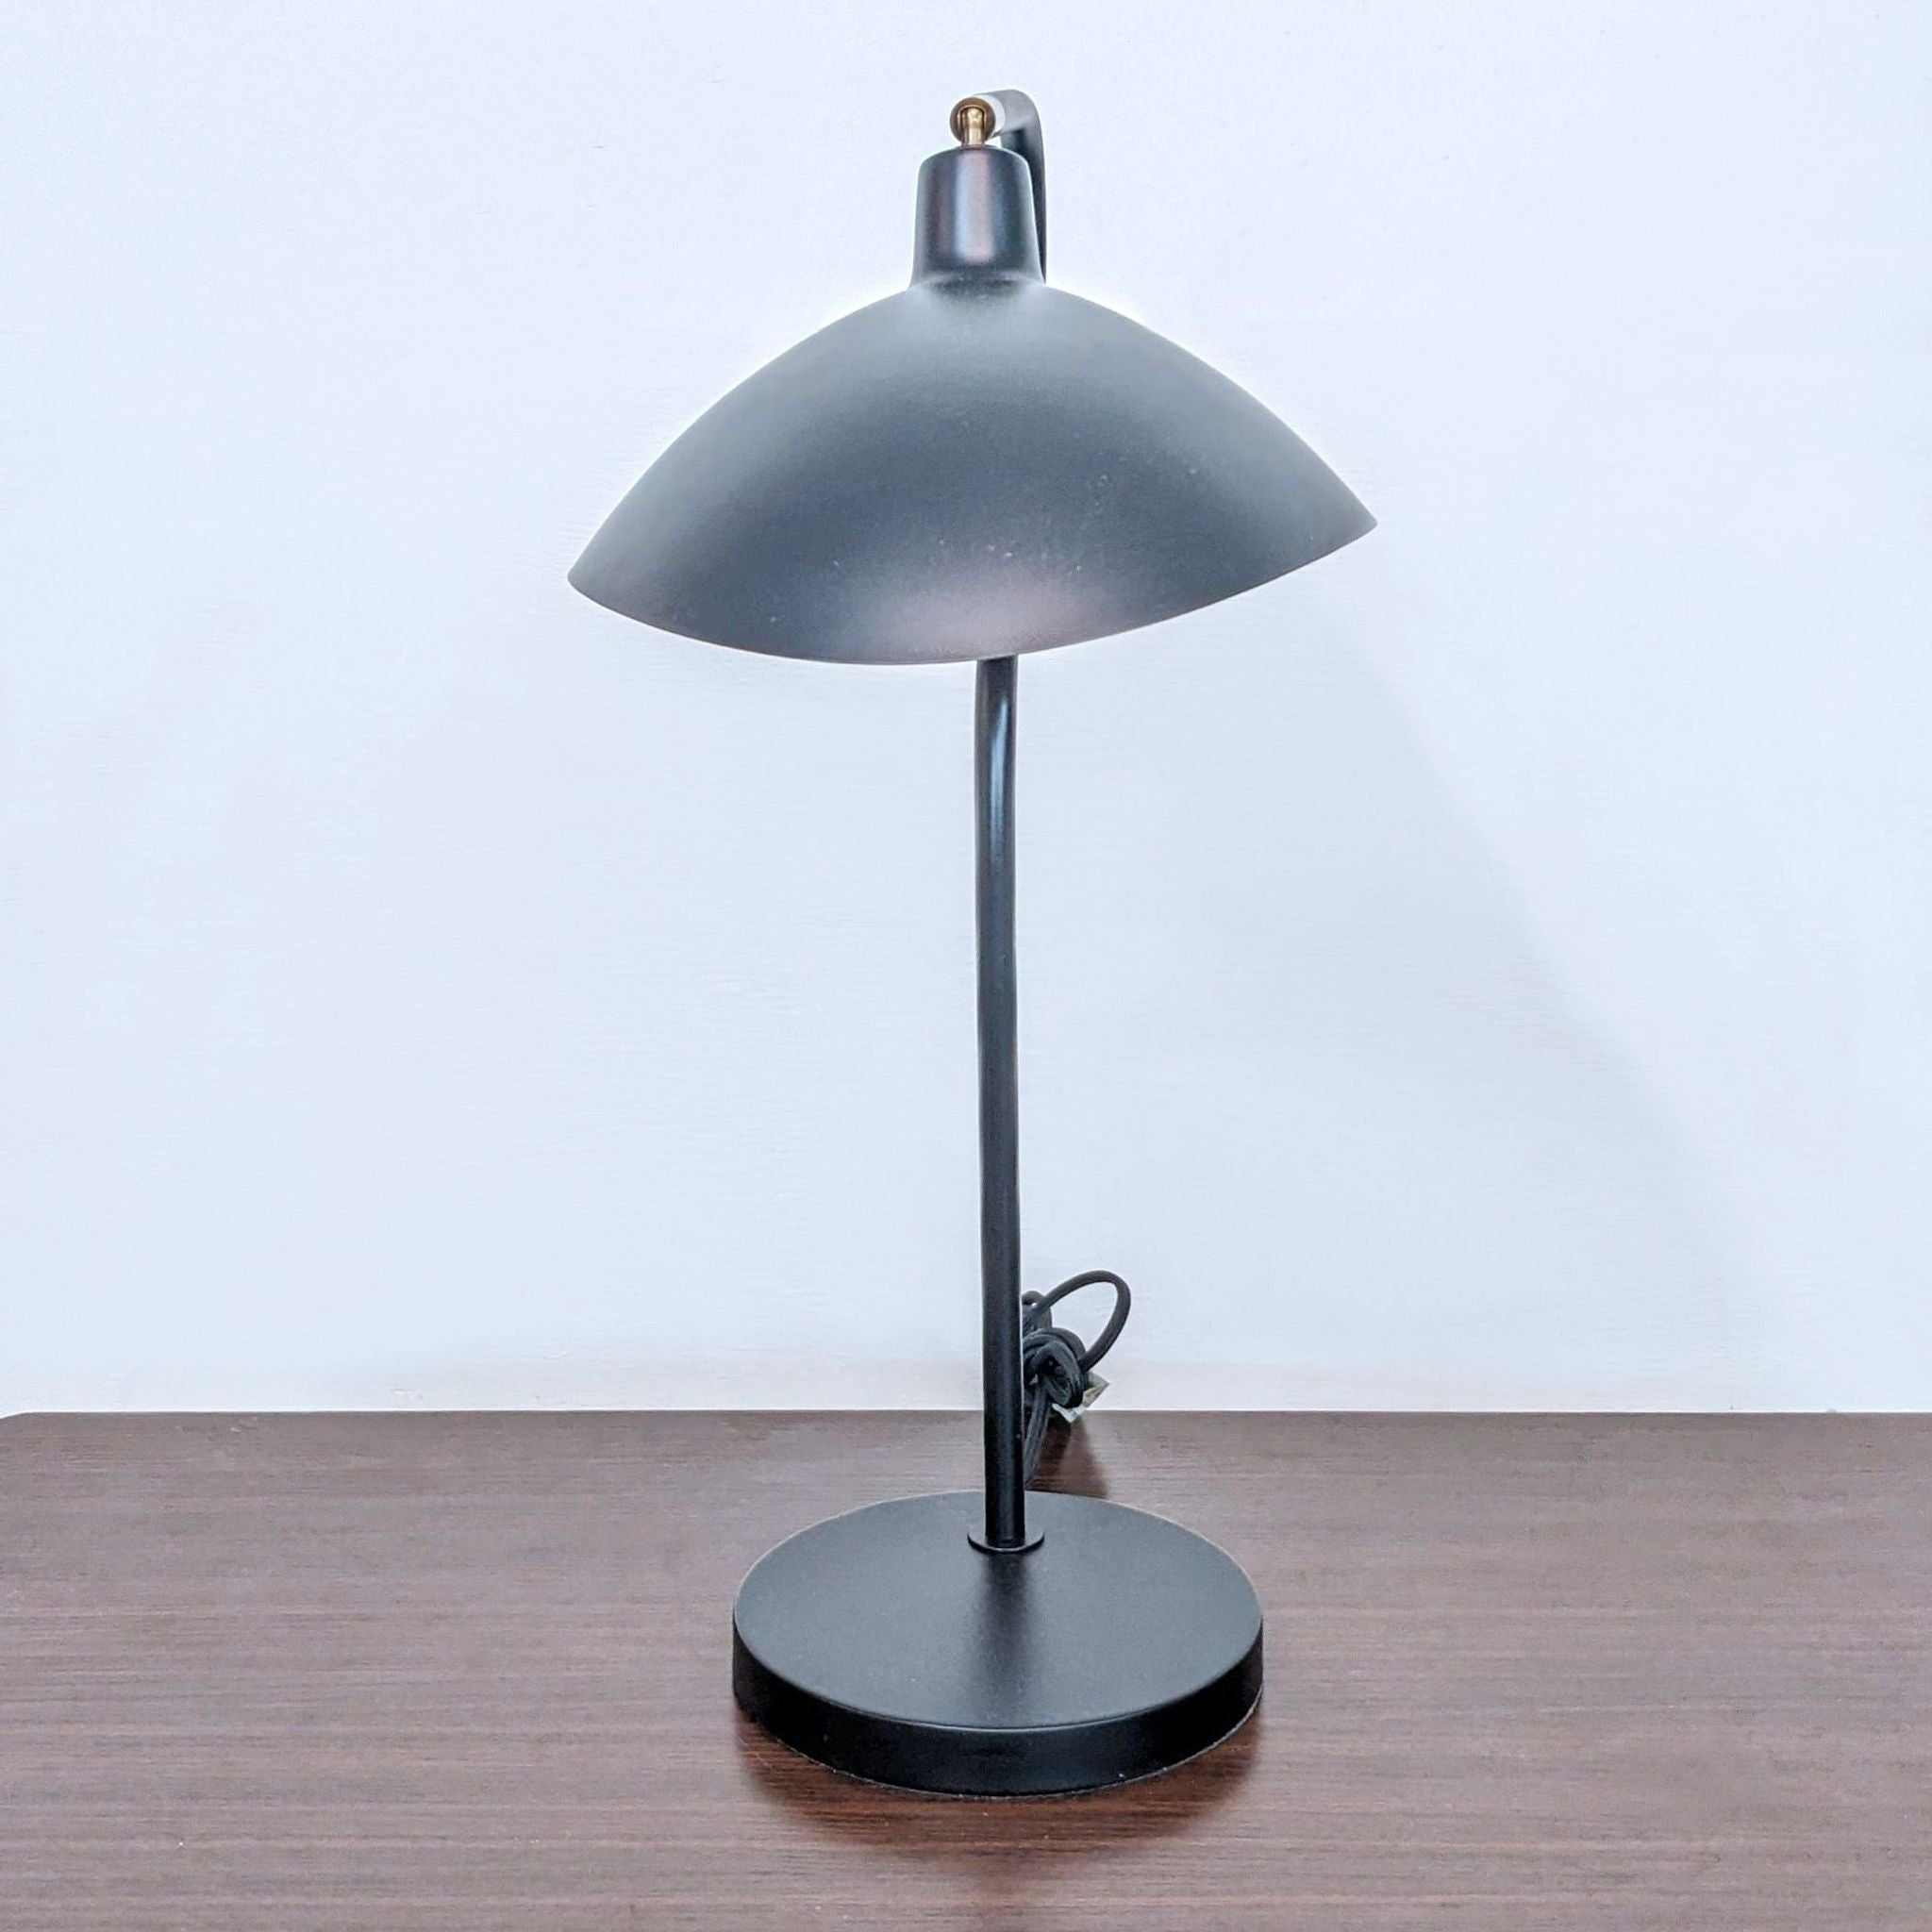 Safavieh brand black desk lamp with a rounded shade and a matte finish, displayed on a wooden table.